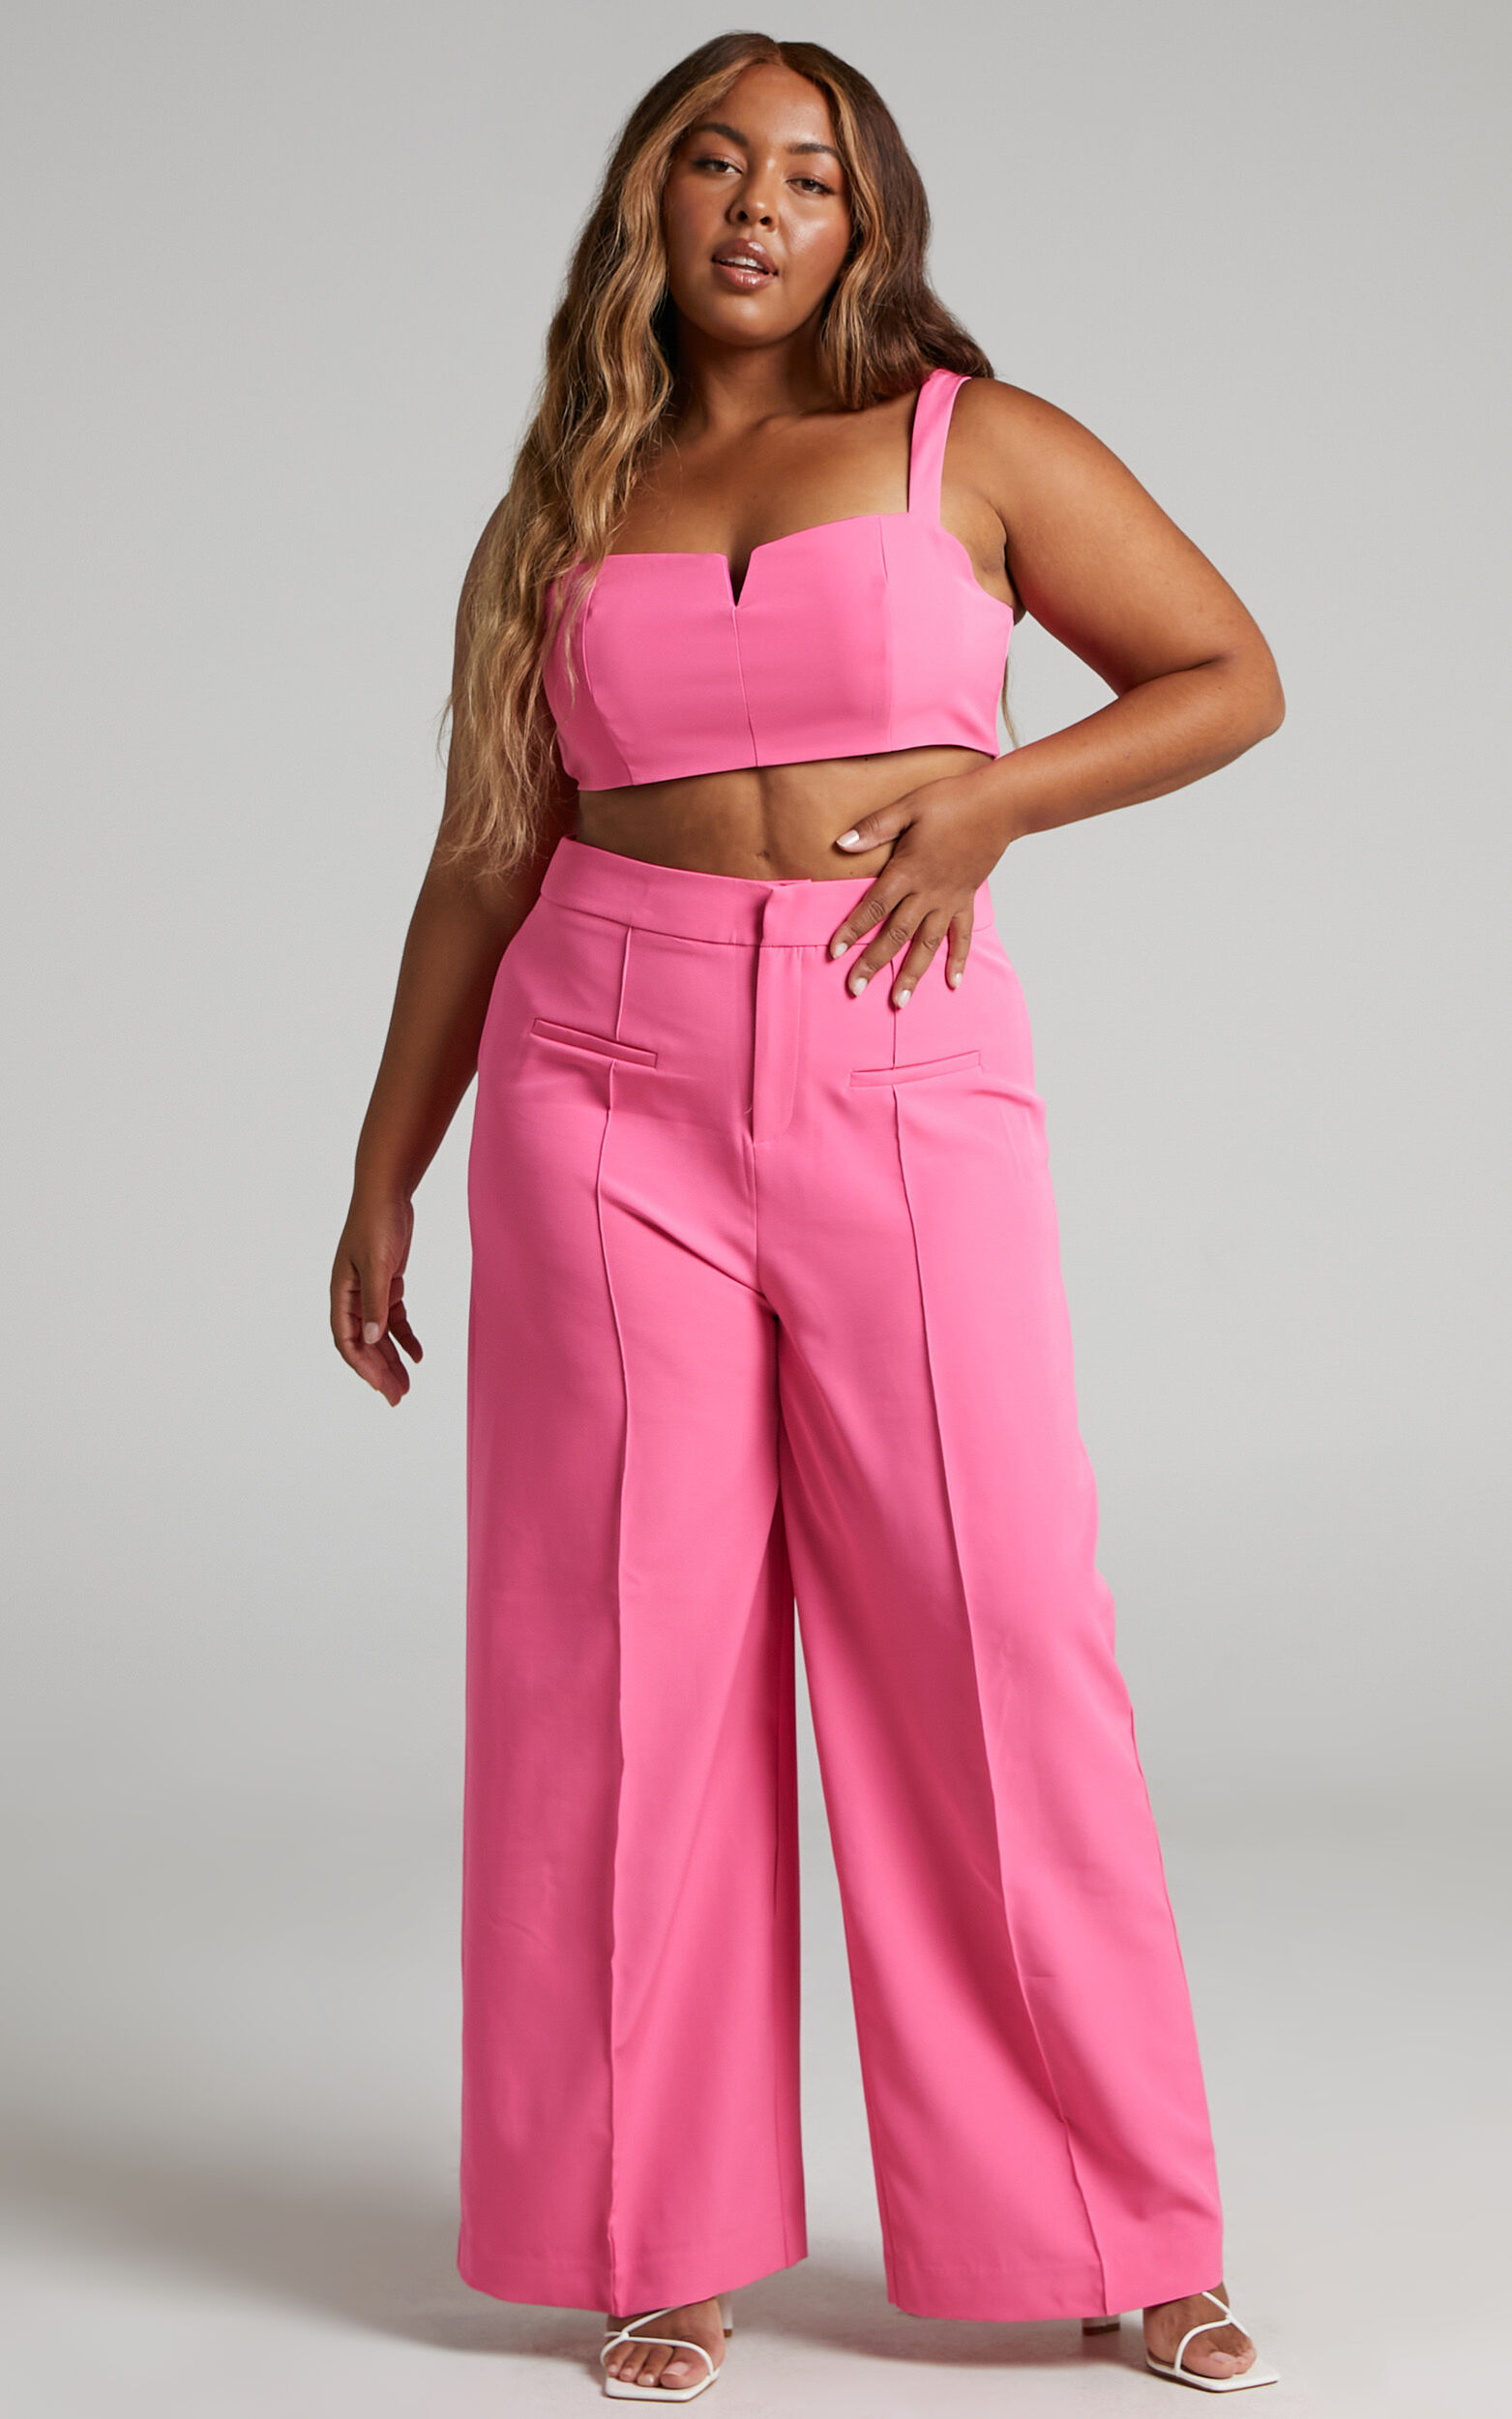 Blue Polyester Co Ords Crop Top And trouser set with formal pant